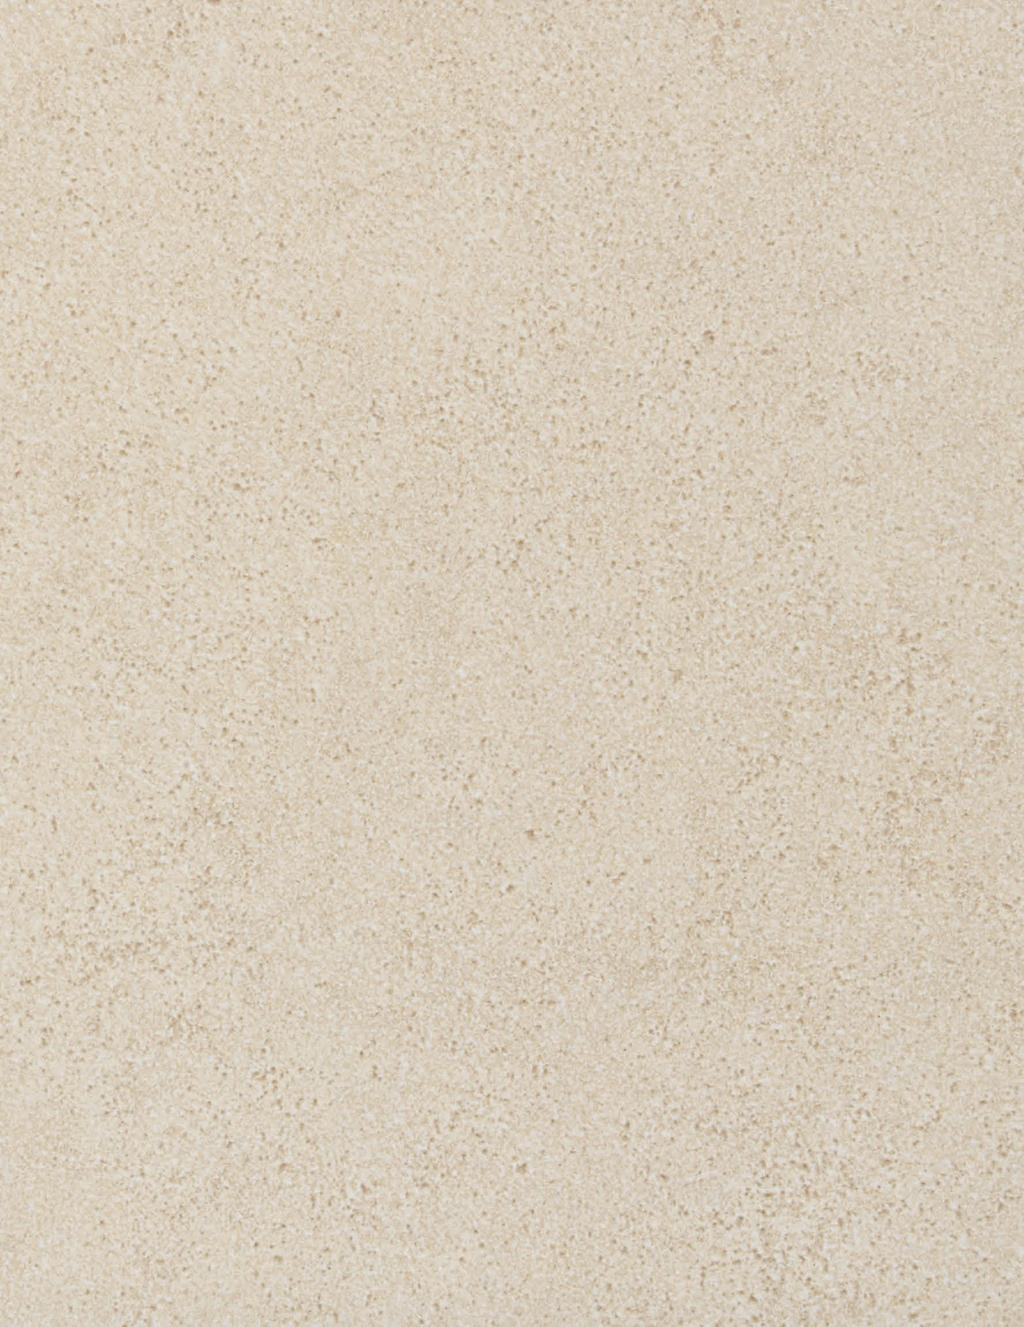 PARKWAY GLAZED CERAMIC floor wall countertop The Sleek Look of Stained Concrete at an Affordable Price Bring the trendy, modern day look of stained concrete into your